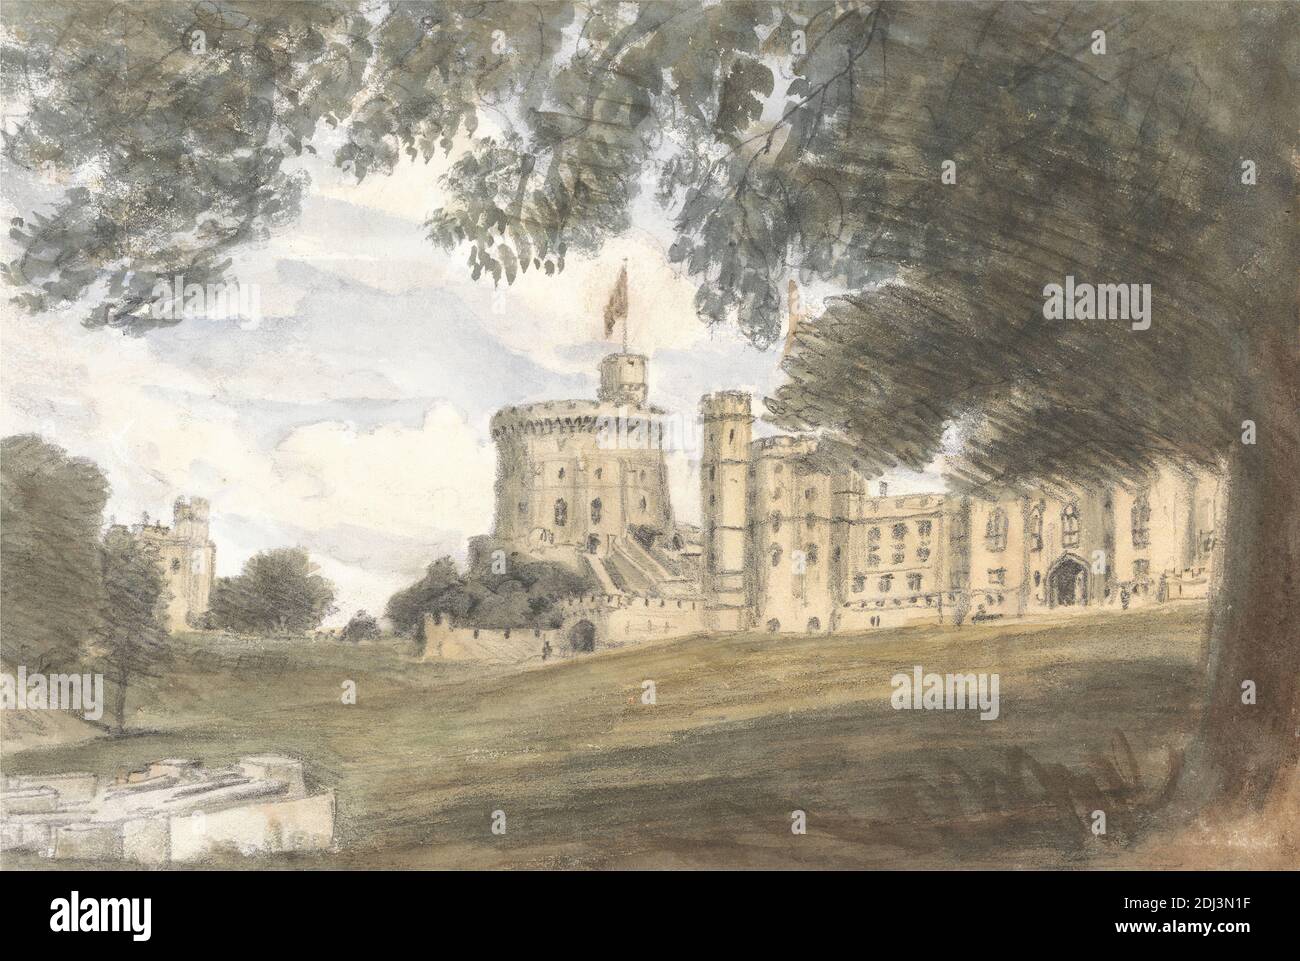 Windsor Castle View - King George IV Gate and the Round Tower, July 28, 1832, 11:30 am, Dr. William Crotch, 1775–1847, 1832, Graphite and watercolor on medium, smooth, blued white, laid paper, Mount: 10 3/8 × 12 3/8 inches (26.4 × 31.4 cm), Contemporary drawn border: 6 1/8 × 8 5/8 inches (15.6 × 21.9 cm), and Sheet: 5 5/16 × 7 15/16 inches (13.5 × 20.2 cm), architectural subject Stock Photo